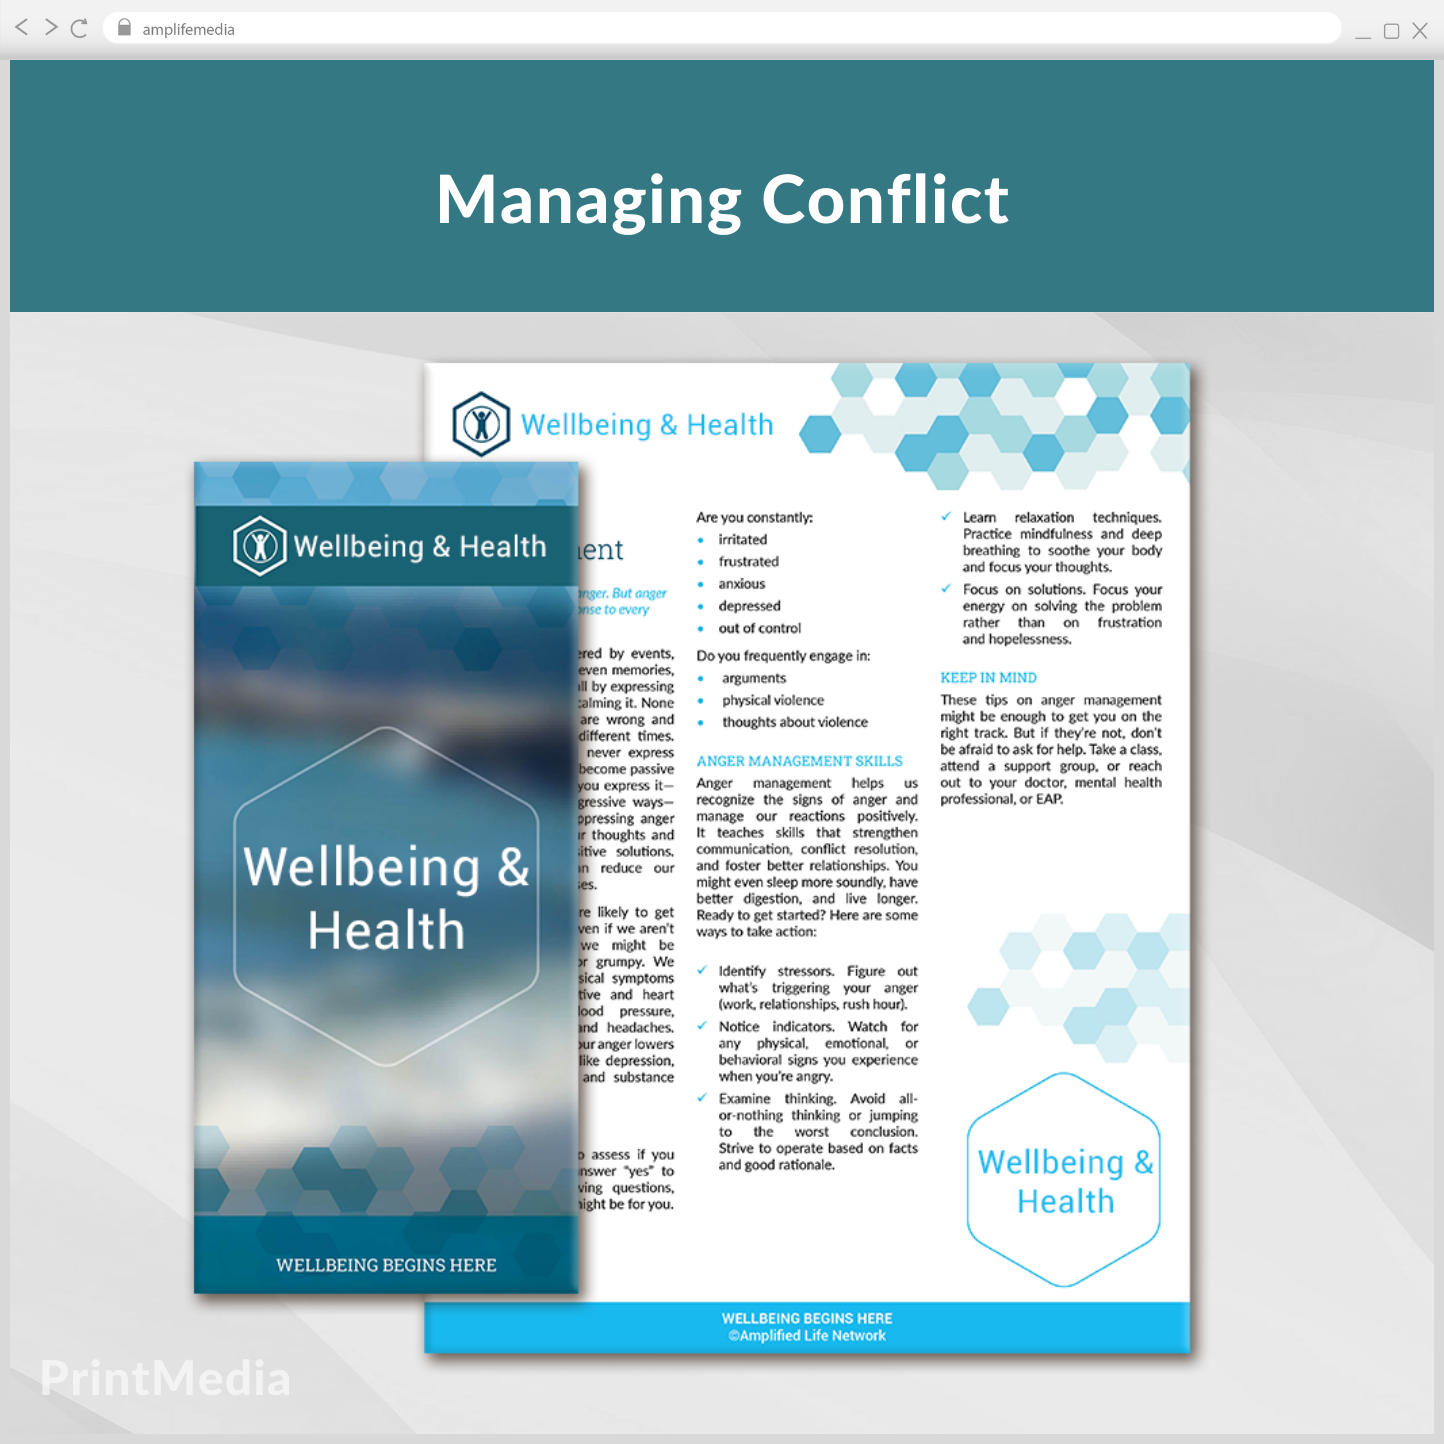 Subscription to Wellbeing Media: Managing Conflict PrintMedia 321